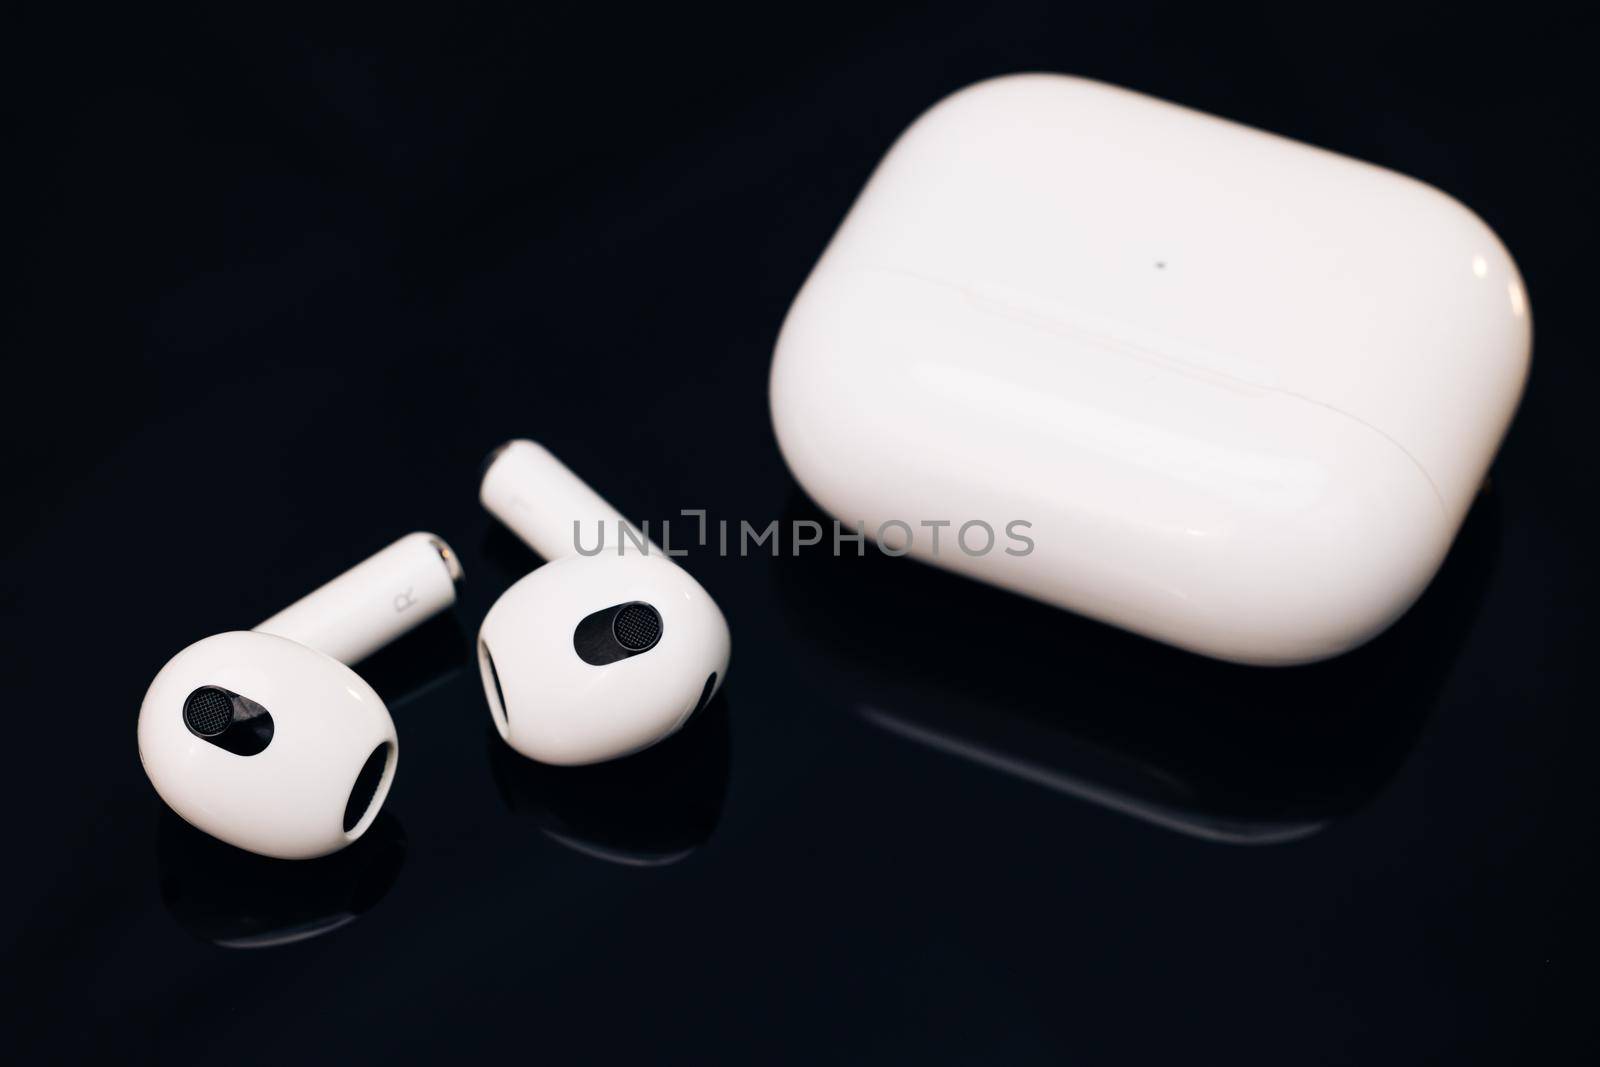 Wireless earphone with noise cancelling technology on black background. Wireless headphones with charging case.